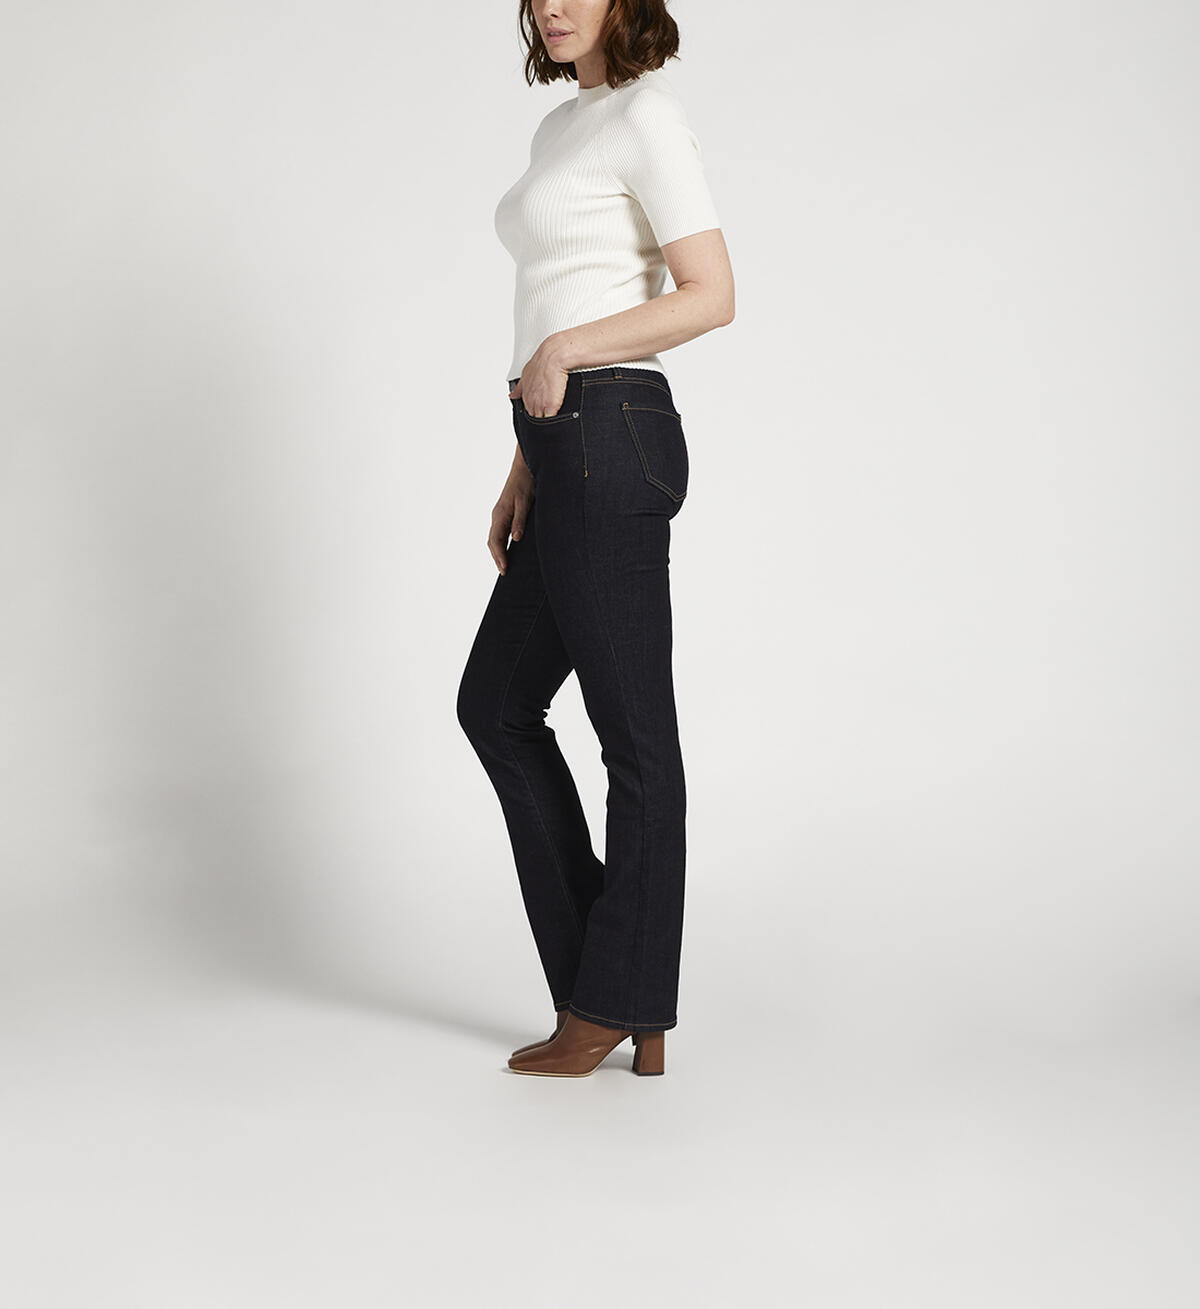 Eloise Mid Rise Bootcut Jeans, , hi-res image number 2